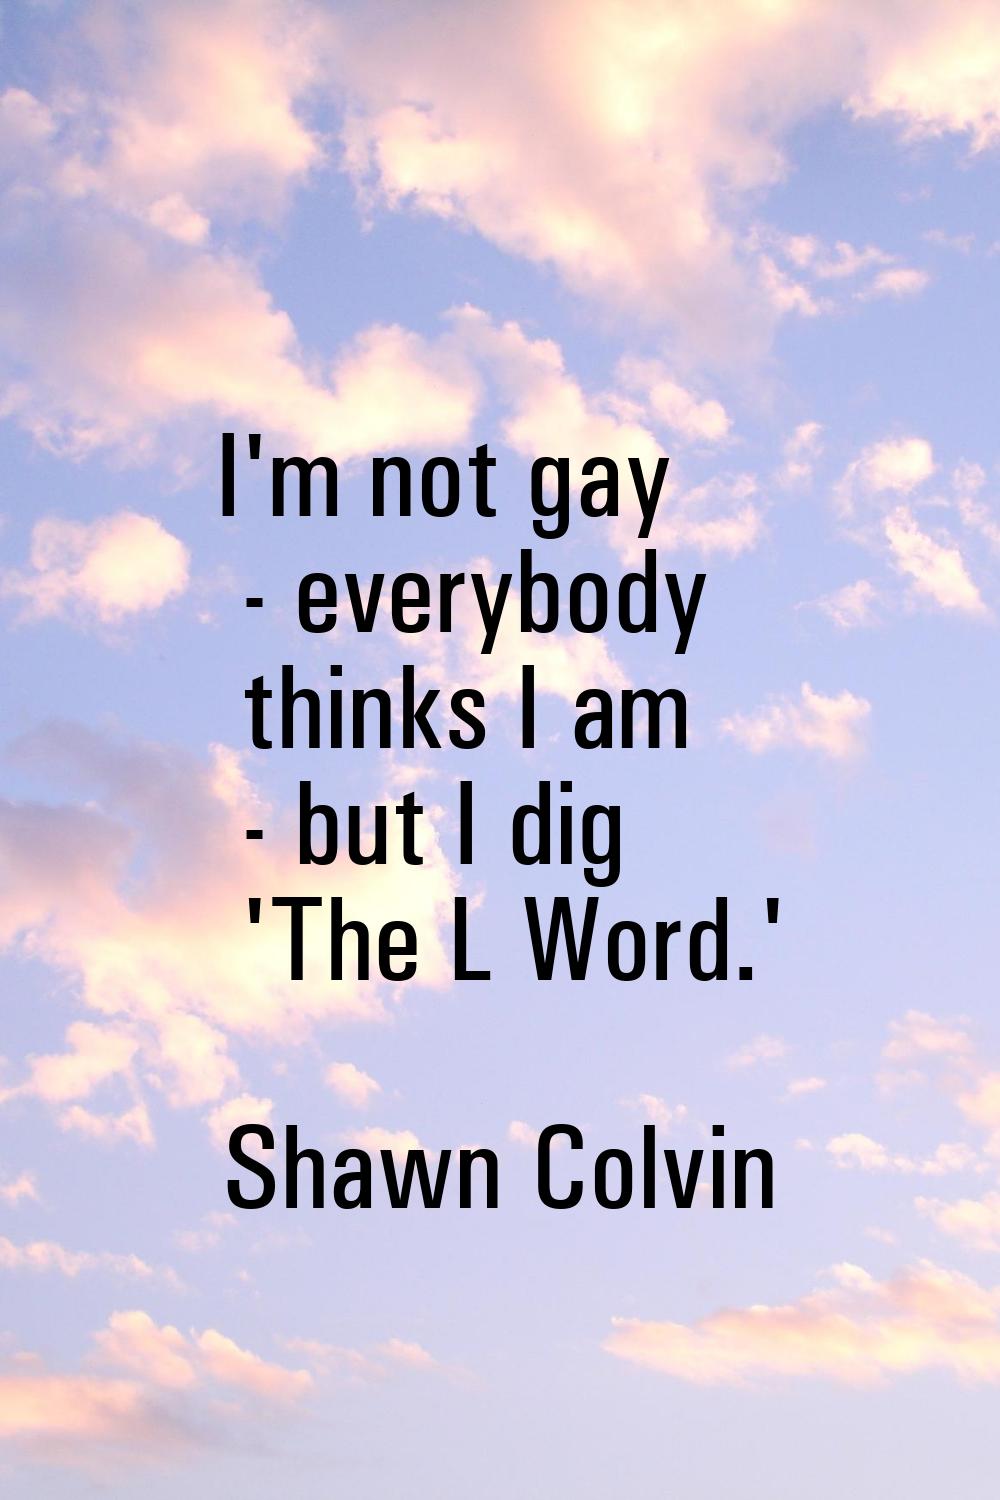 I'm not gay - everybody thinks I am - but I dig 'The L Word.'